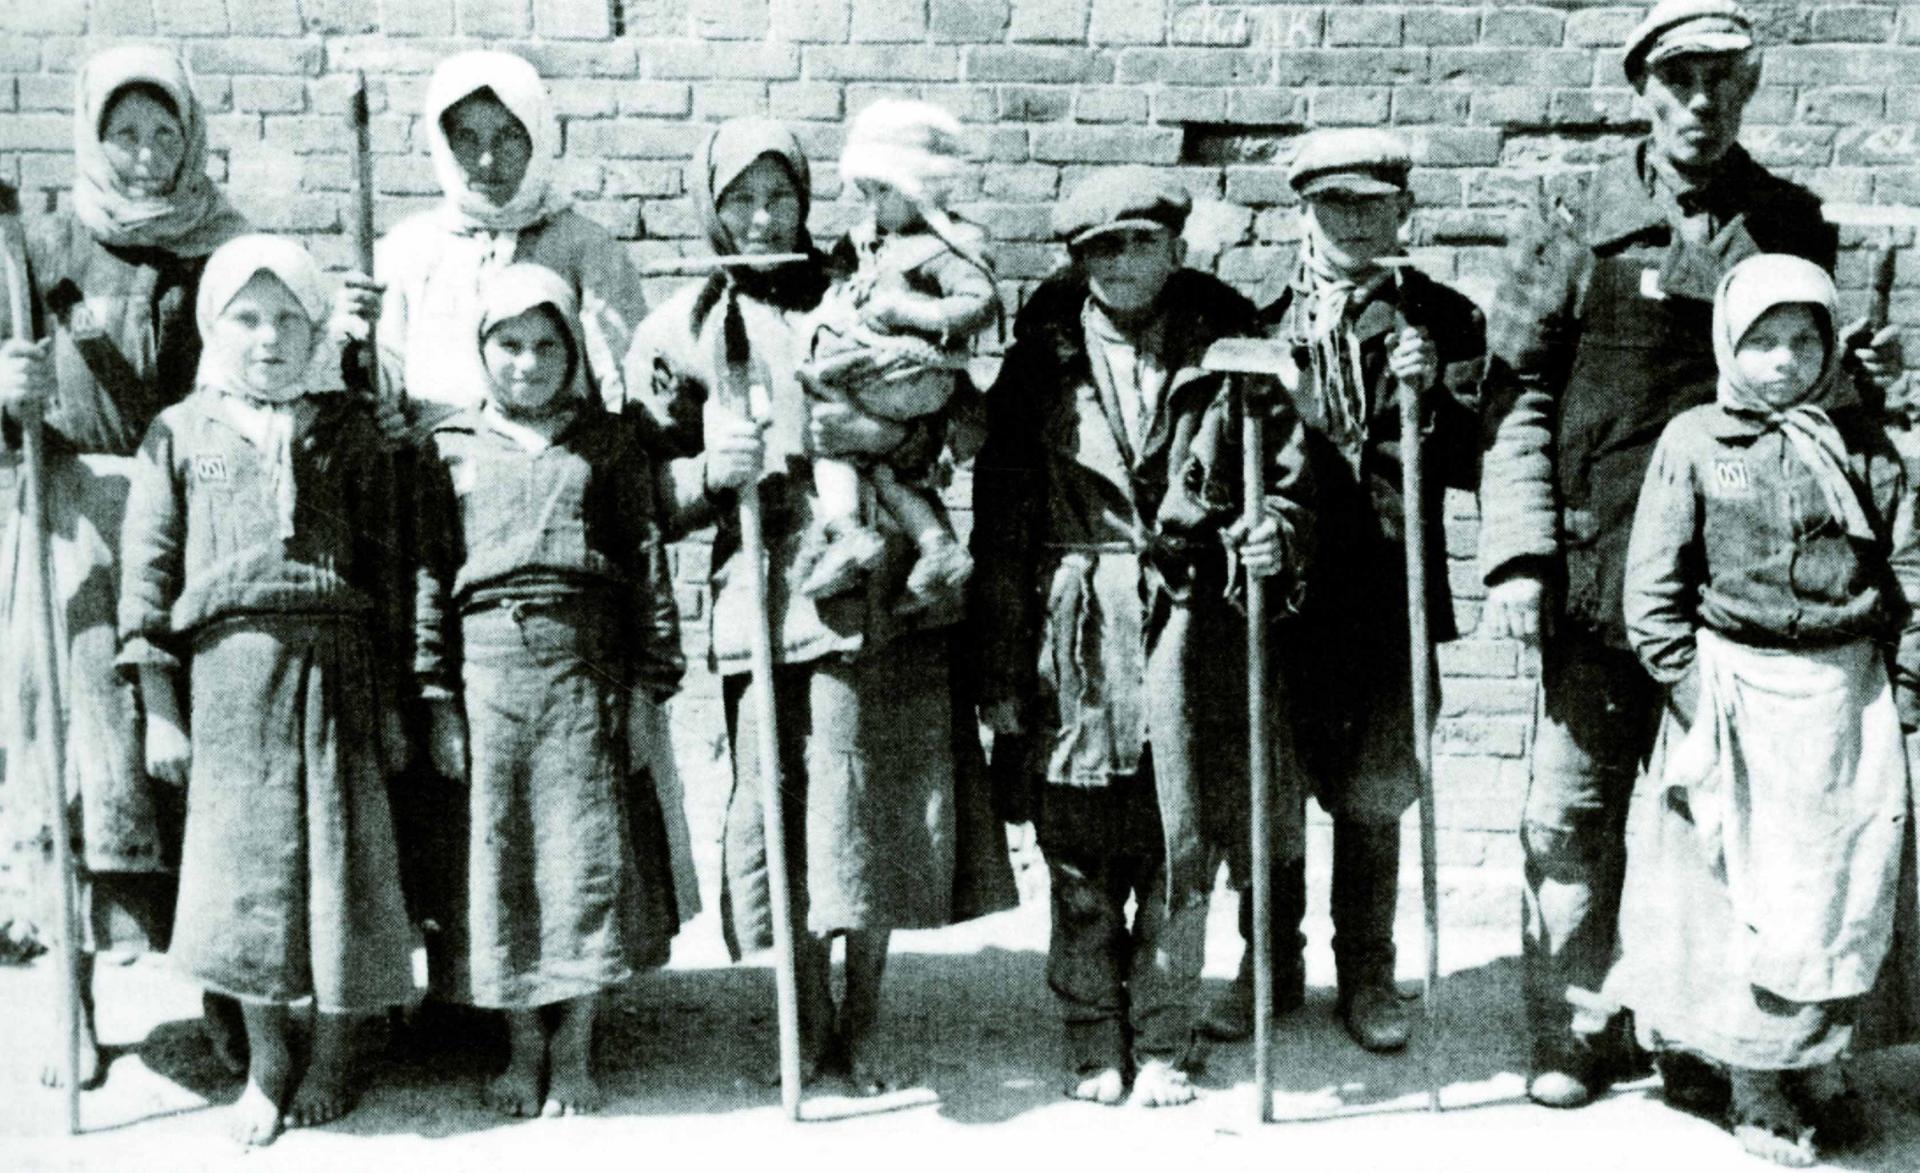 Ten people, mostly unshod and mostly children, with farming implements